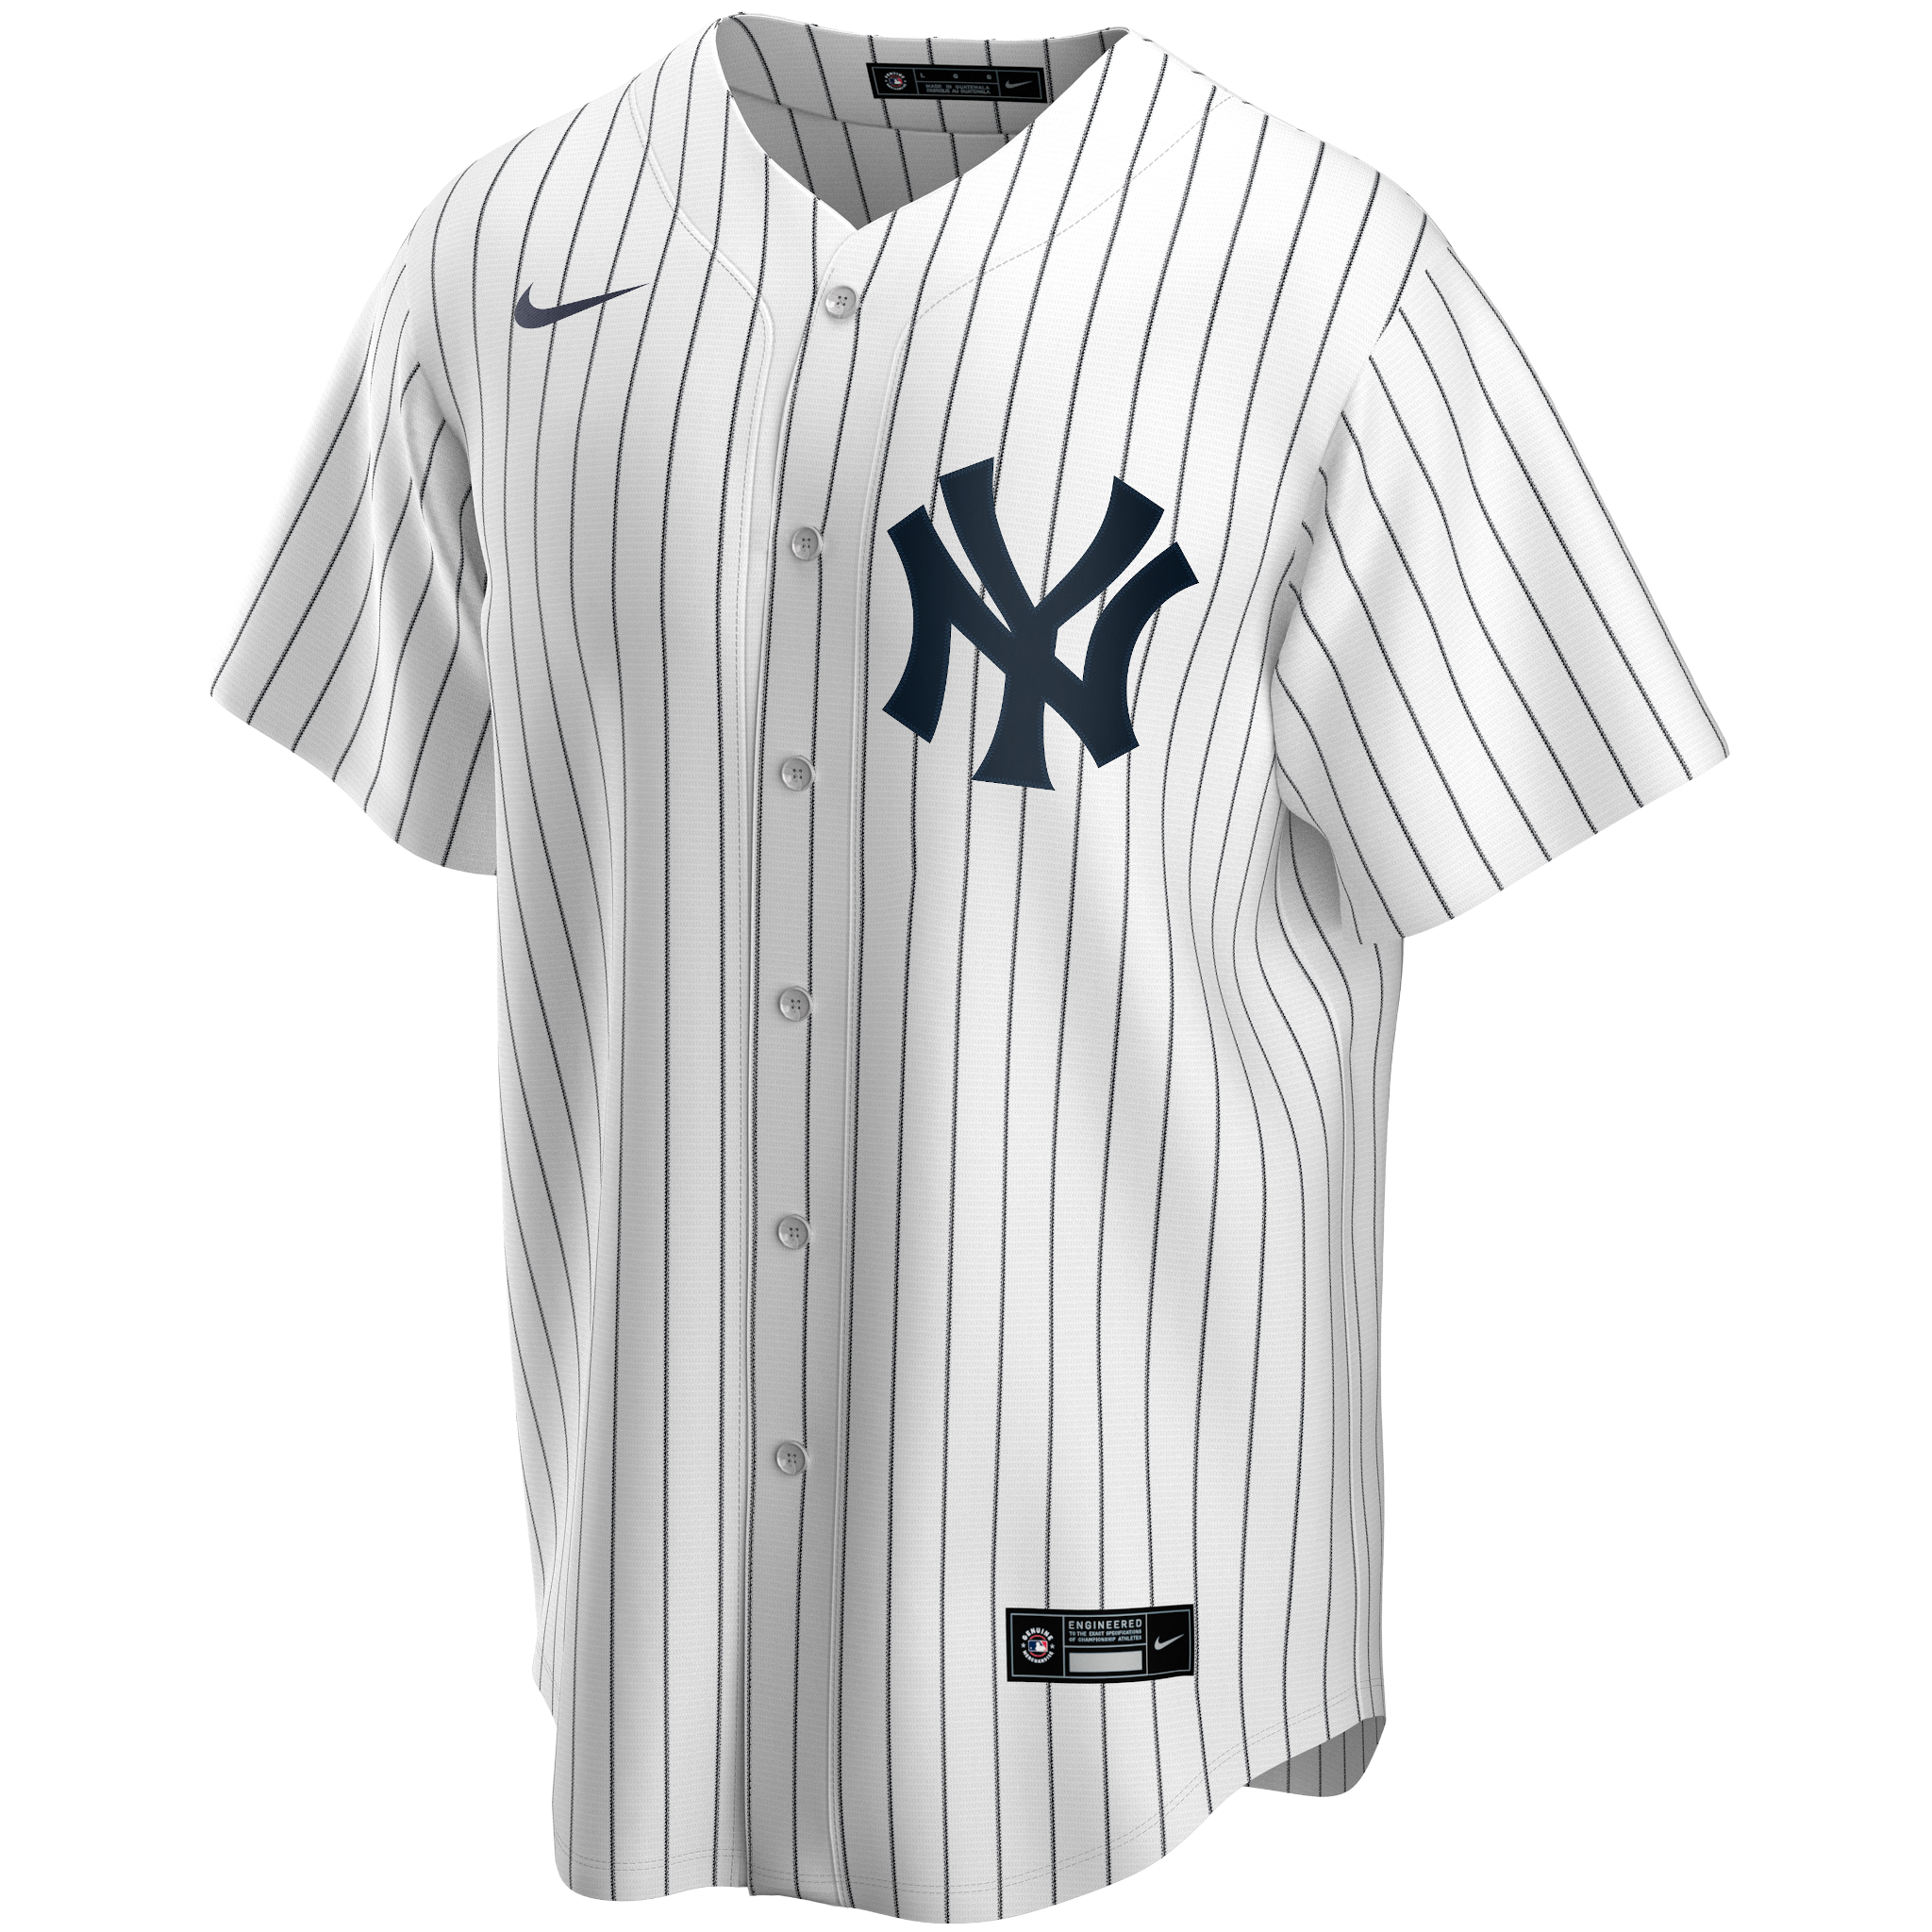 CC Sabathia New York Yankees 2018 ALDS Game Used #52 Pinstripe Jersey  (10/9/18) - Worn in the 1st Inning